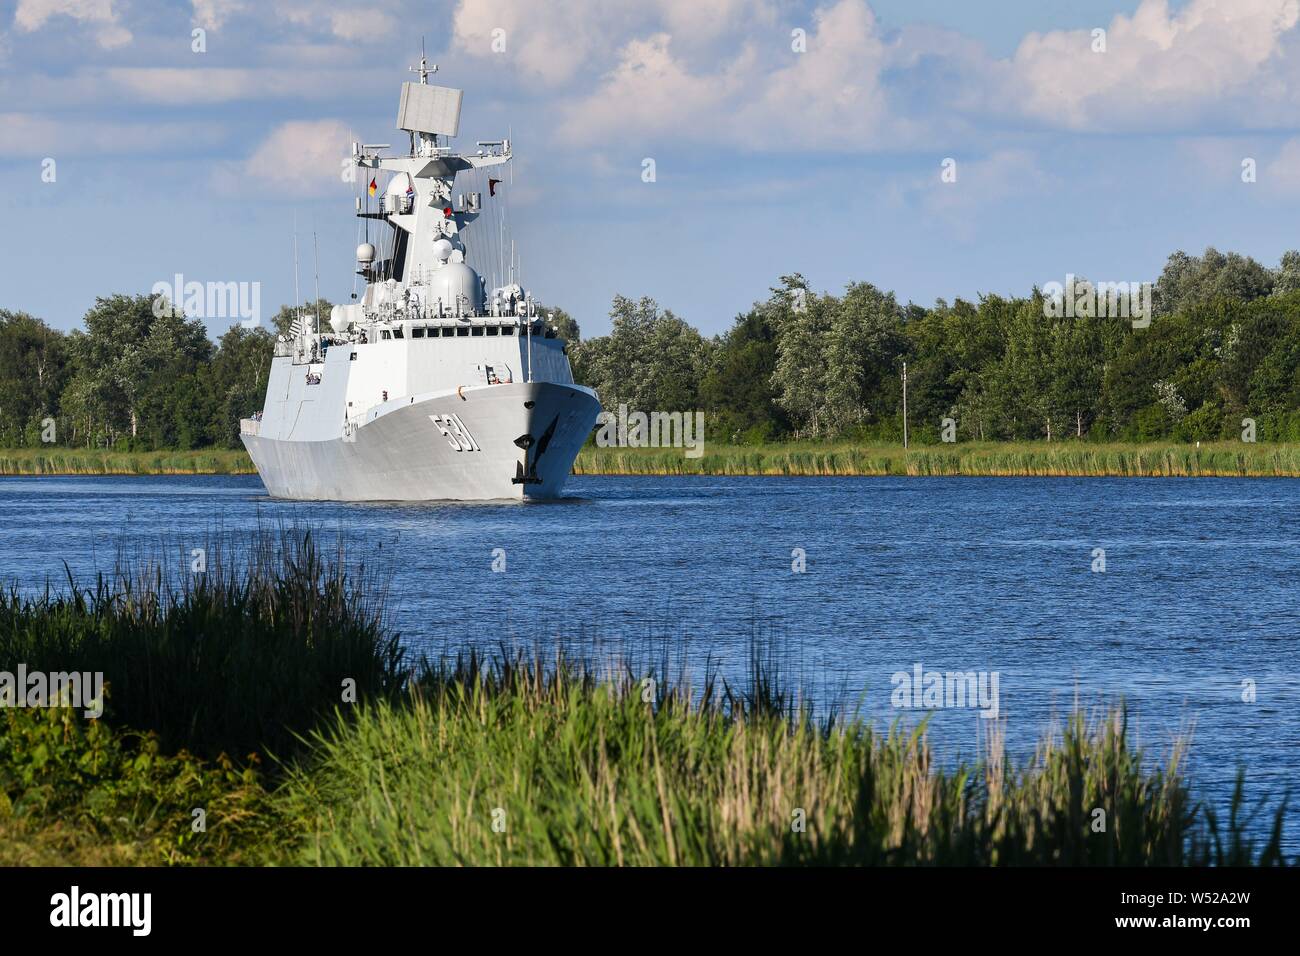 A Type 54A (Nato: Jiangkai II) frigate, the F 531 'Xiangtan', leaves the Baltic Sea via the Kiel Canal, taken near Breiholz. The ships of the type 54A are modern multipurpose frigates which are built in large numbers. They are relatively inexpensive and are also exported to Pakistan. Much of the electronic equipment and armament of these ships is still based on Russian technology. The Navy of the People's Republic of China has been for years to modernize its fleet and expand. The goal is to transform the fleet from a pure coastal defense fleet into a global fleet. As part of this, China has be Stock Photo